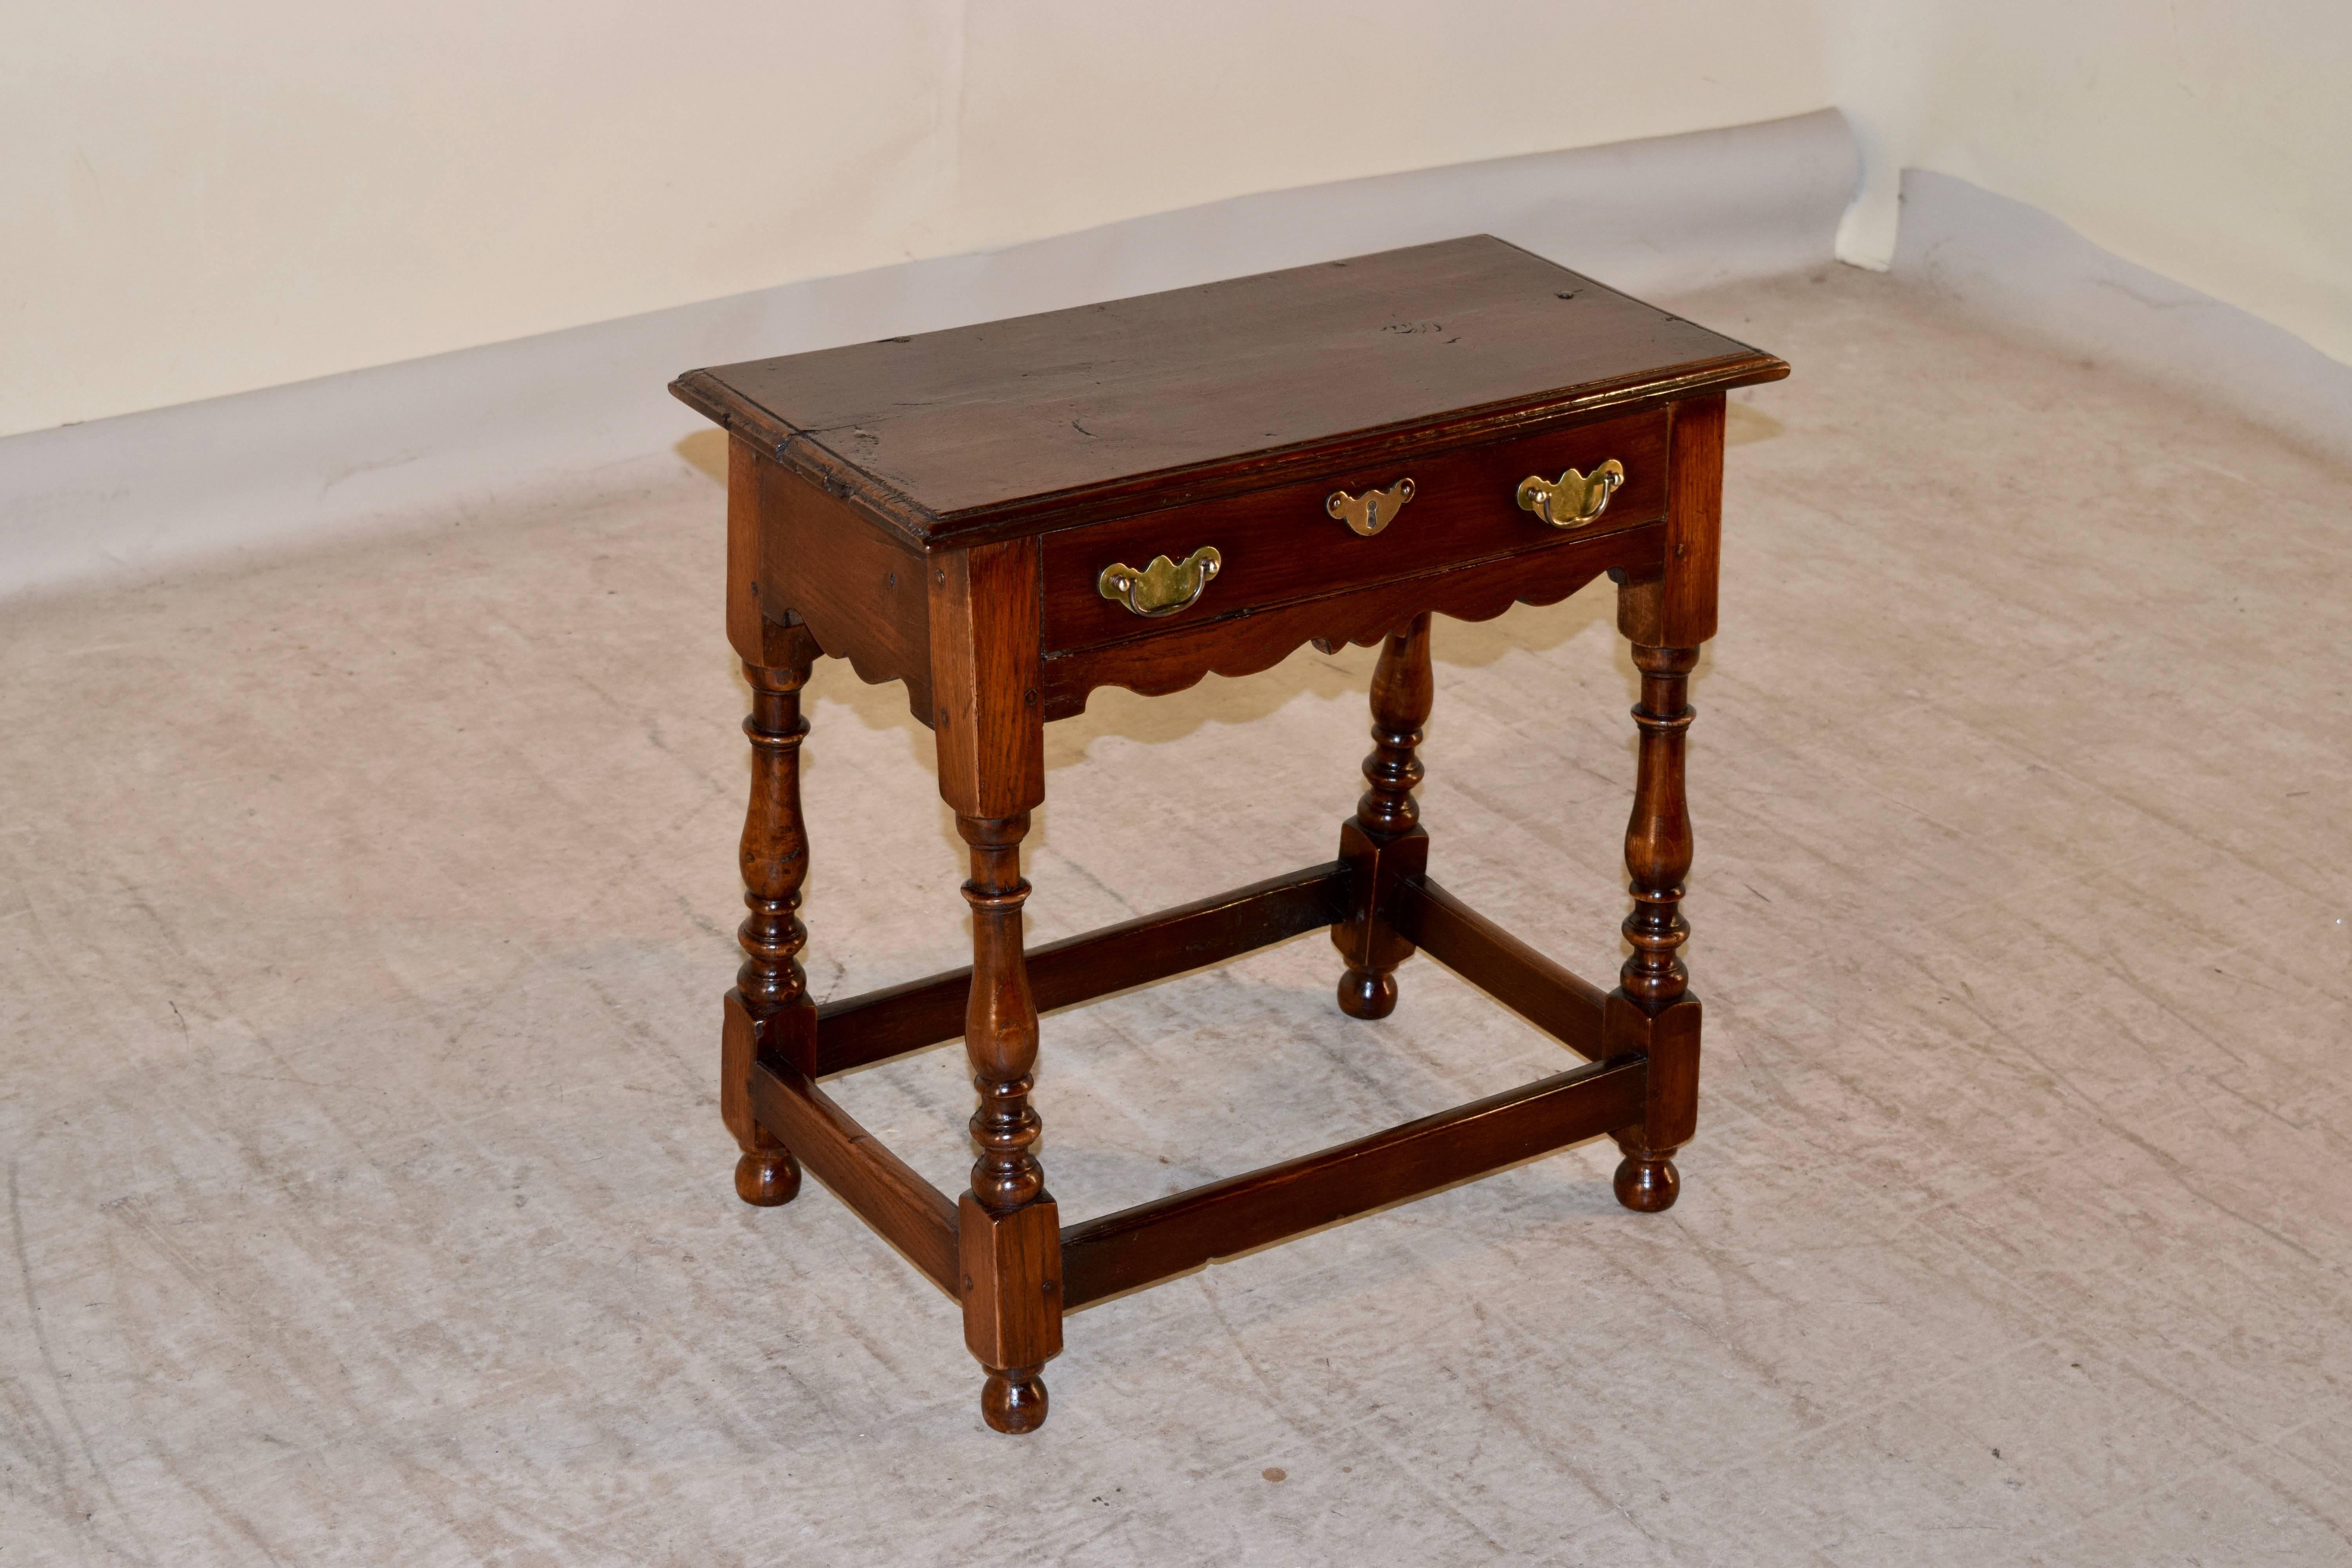 19th Century English oak side table with a two plank top which has a beveled and molded edge and pegged construction. The apron is simple and contains a single drawer in the front. The piece is supported on hand-turned legs, joined by simple